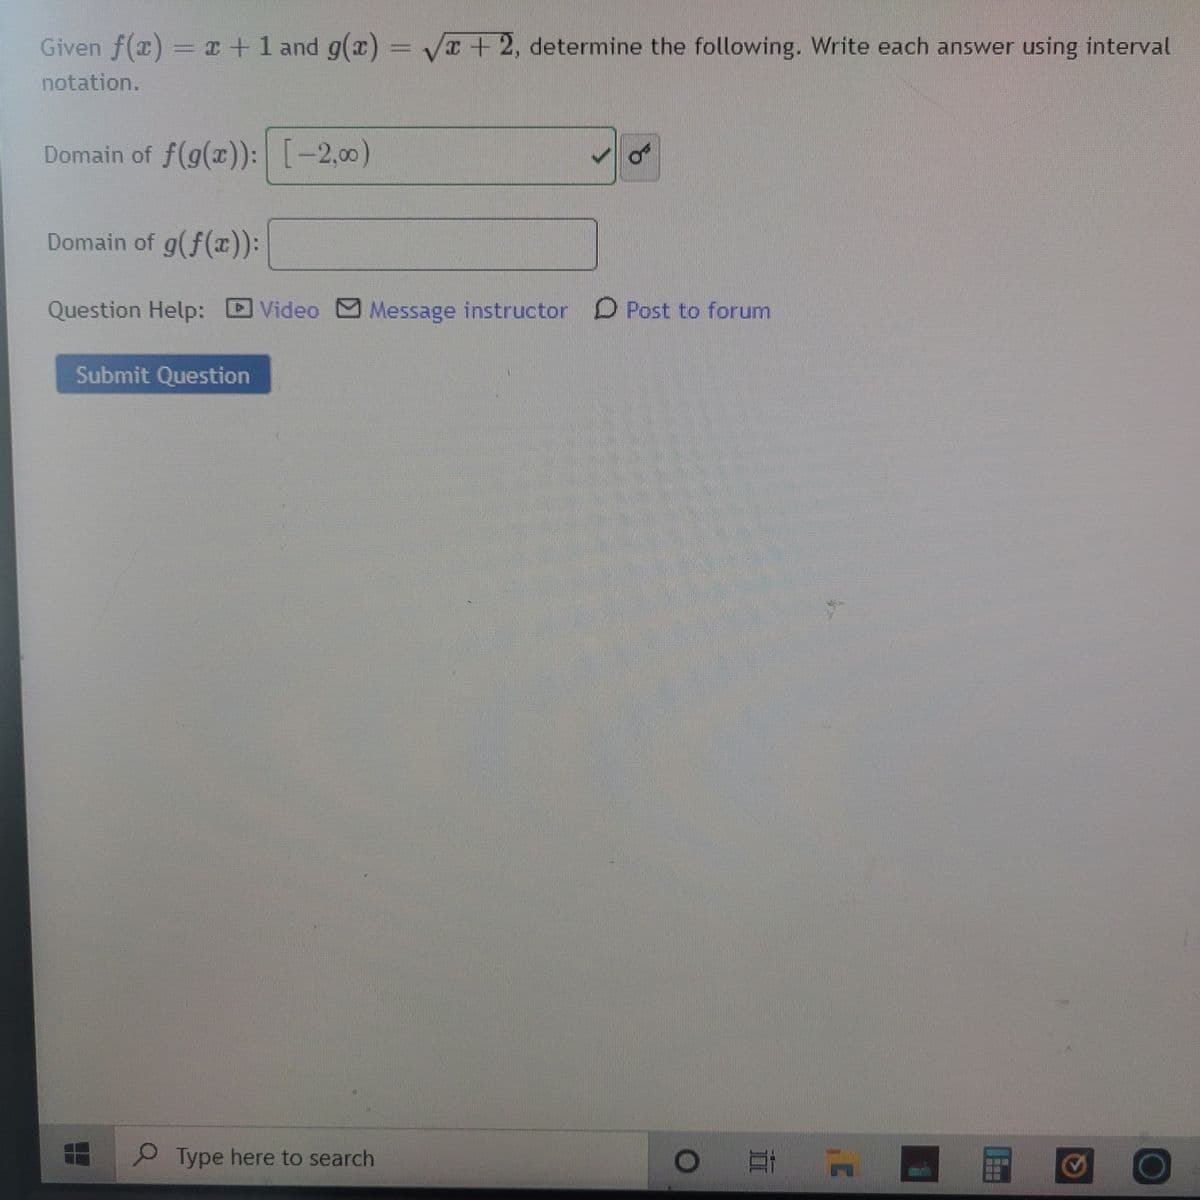 Given f(x) = x+1 and g(x) =
I+2, determine the following. Write each answer using interval
notation.
Domain of f(g(x)): [-2,00)
Domain of g(f(r):
Question Help:
Video Message instructor D Post to forum
Submit Question
Type here to search
